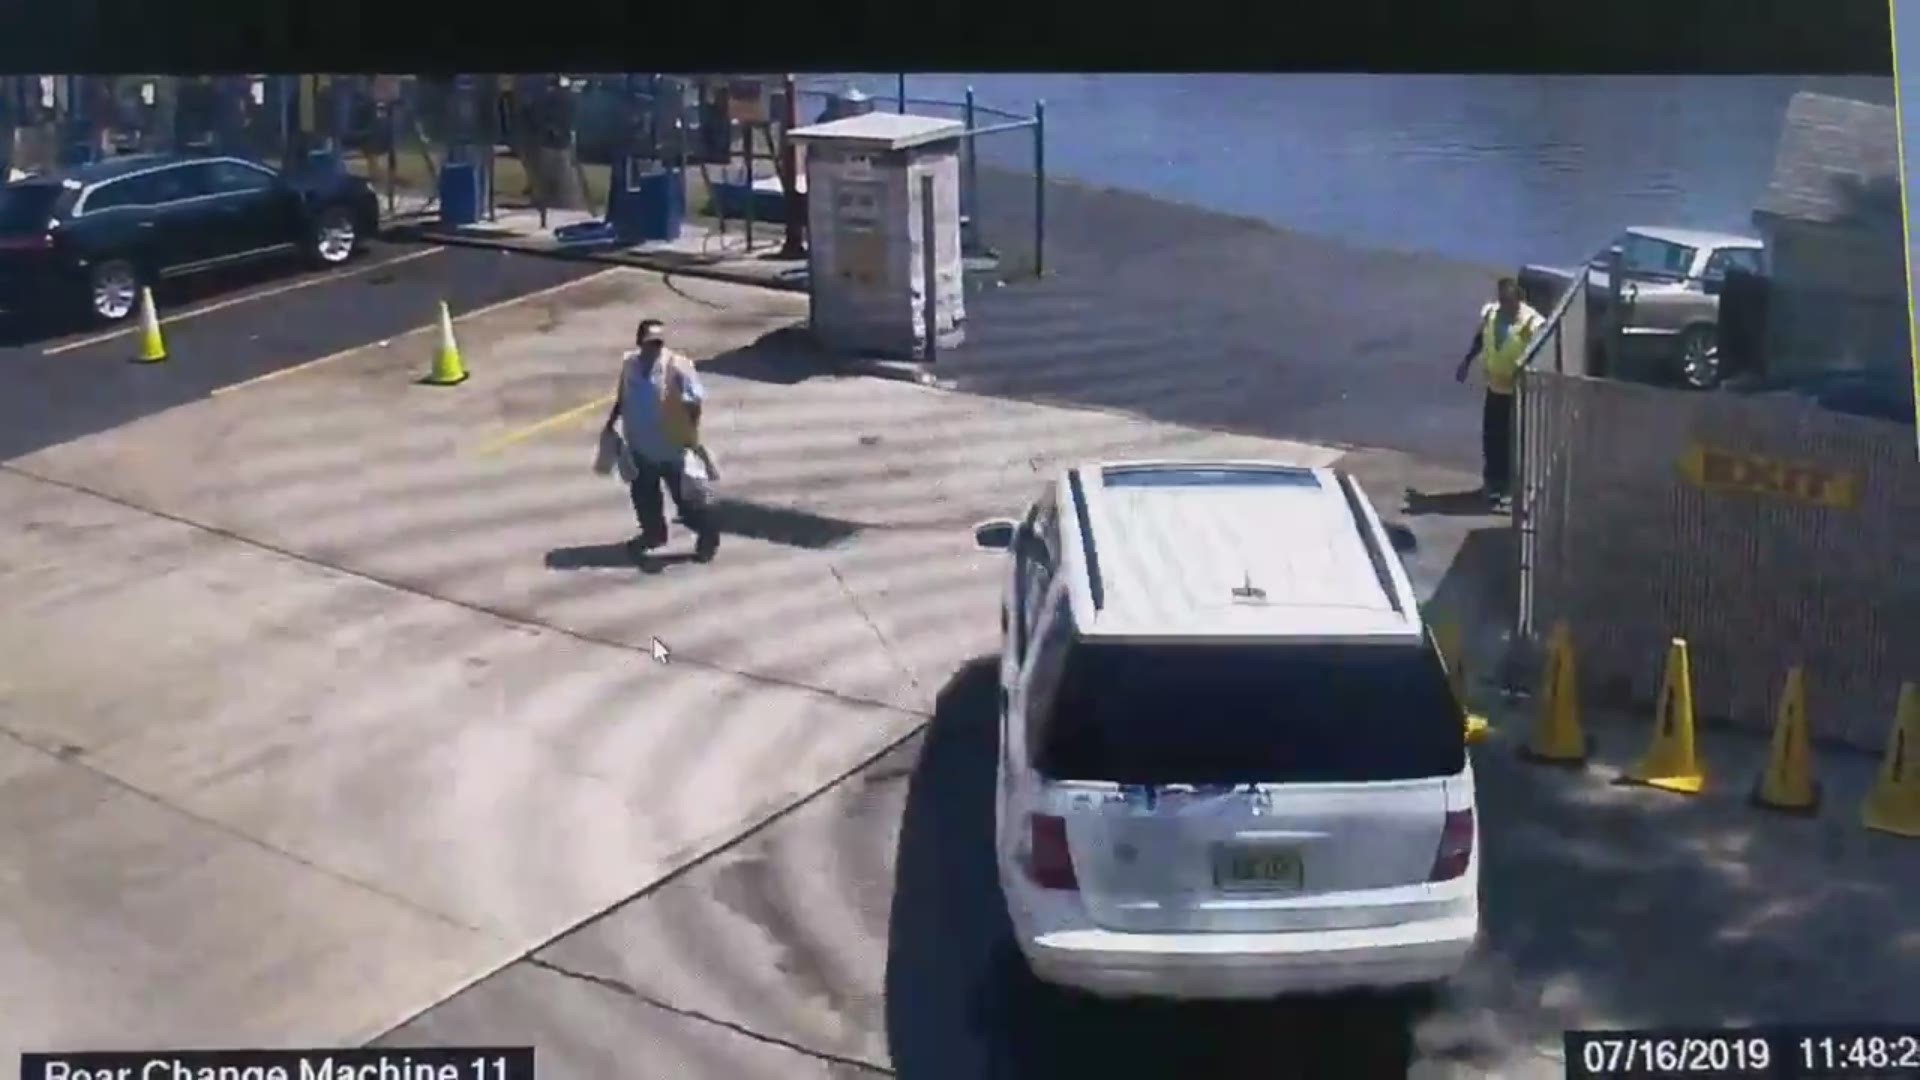 Surveillance video shows a white SUV plunging in to the Hackensack River in New Jersey. Video courtesy of the Hackensack Fire Department.